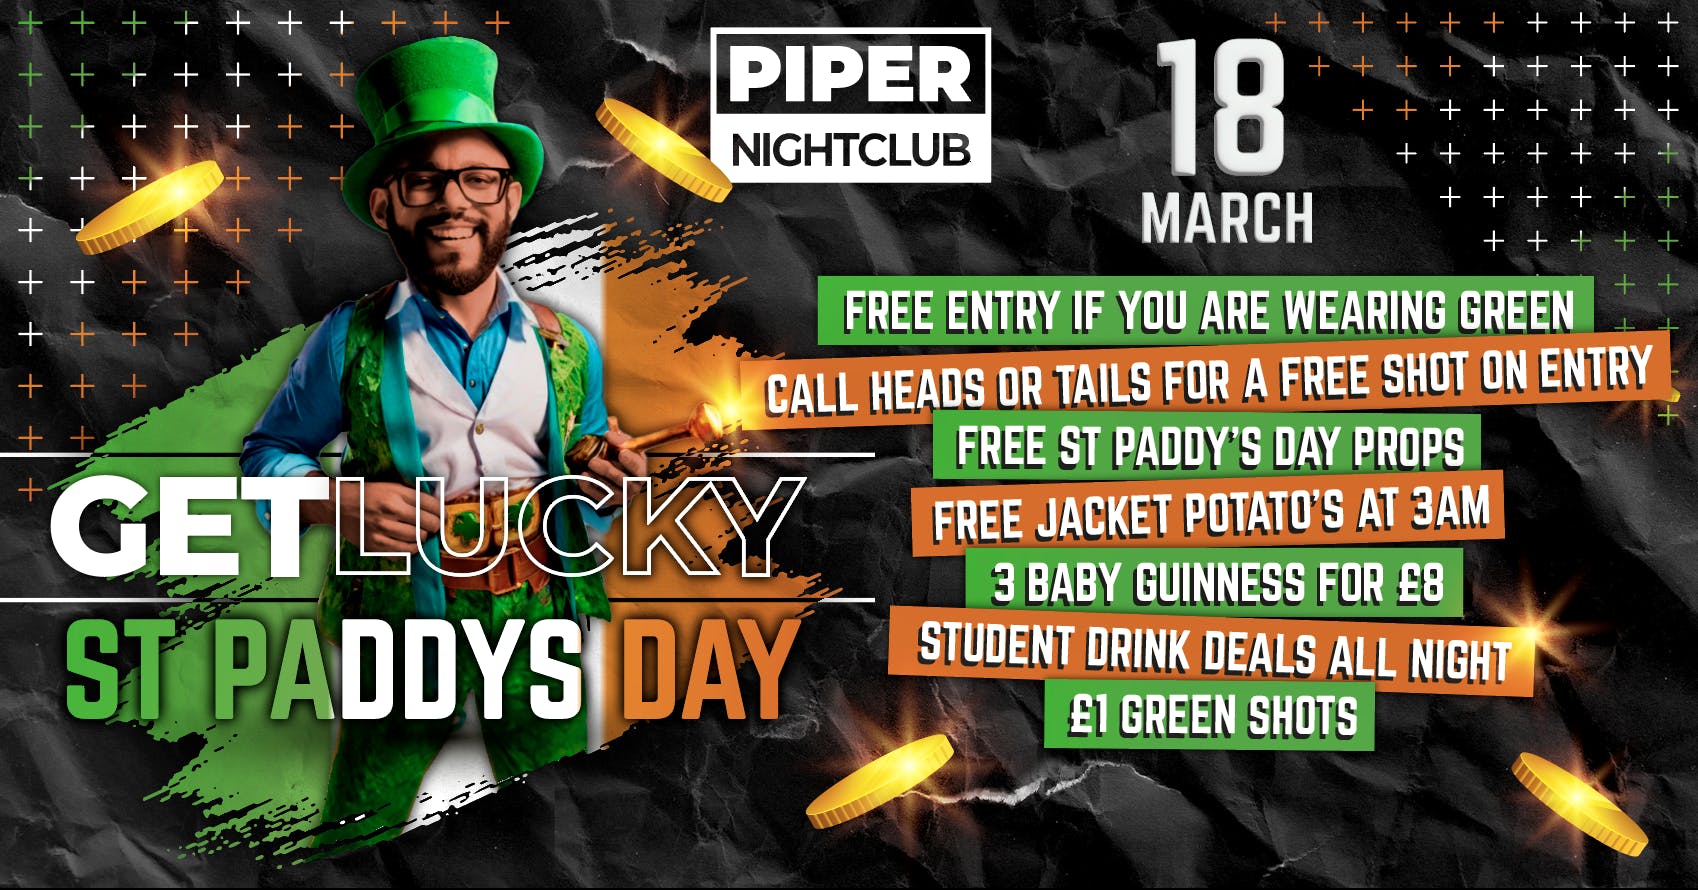 Make This St. Paddy's Day the Luckiest! at Grove City Premium